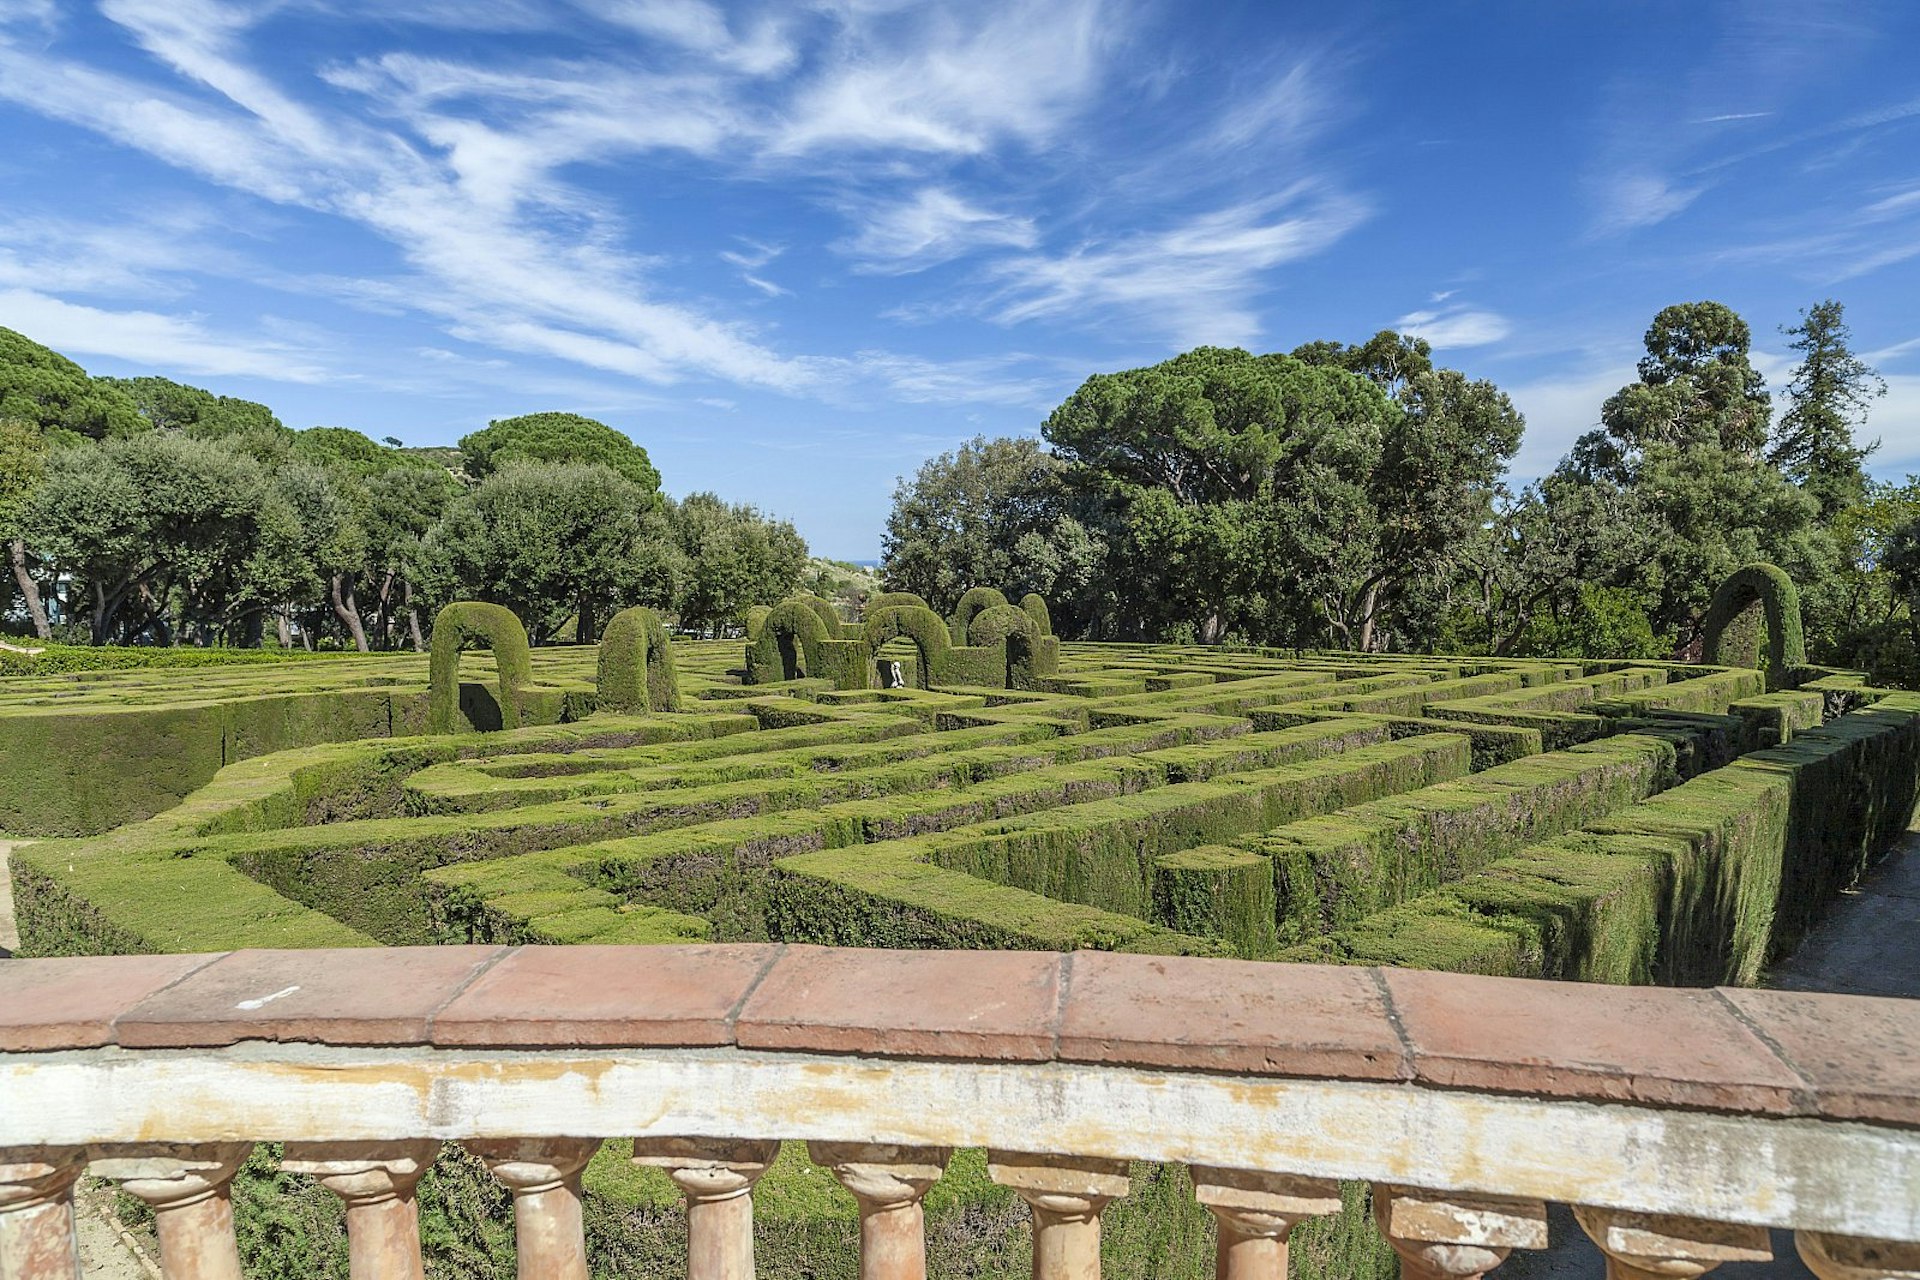 Looking over a pillared wall to a cypress hedge labyrinth below, with trees beyond.